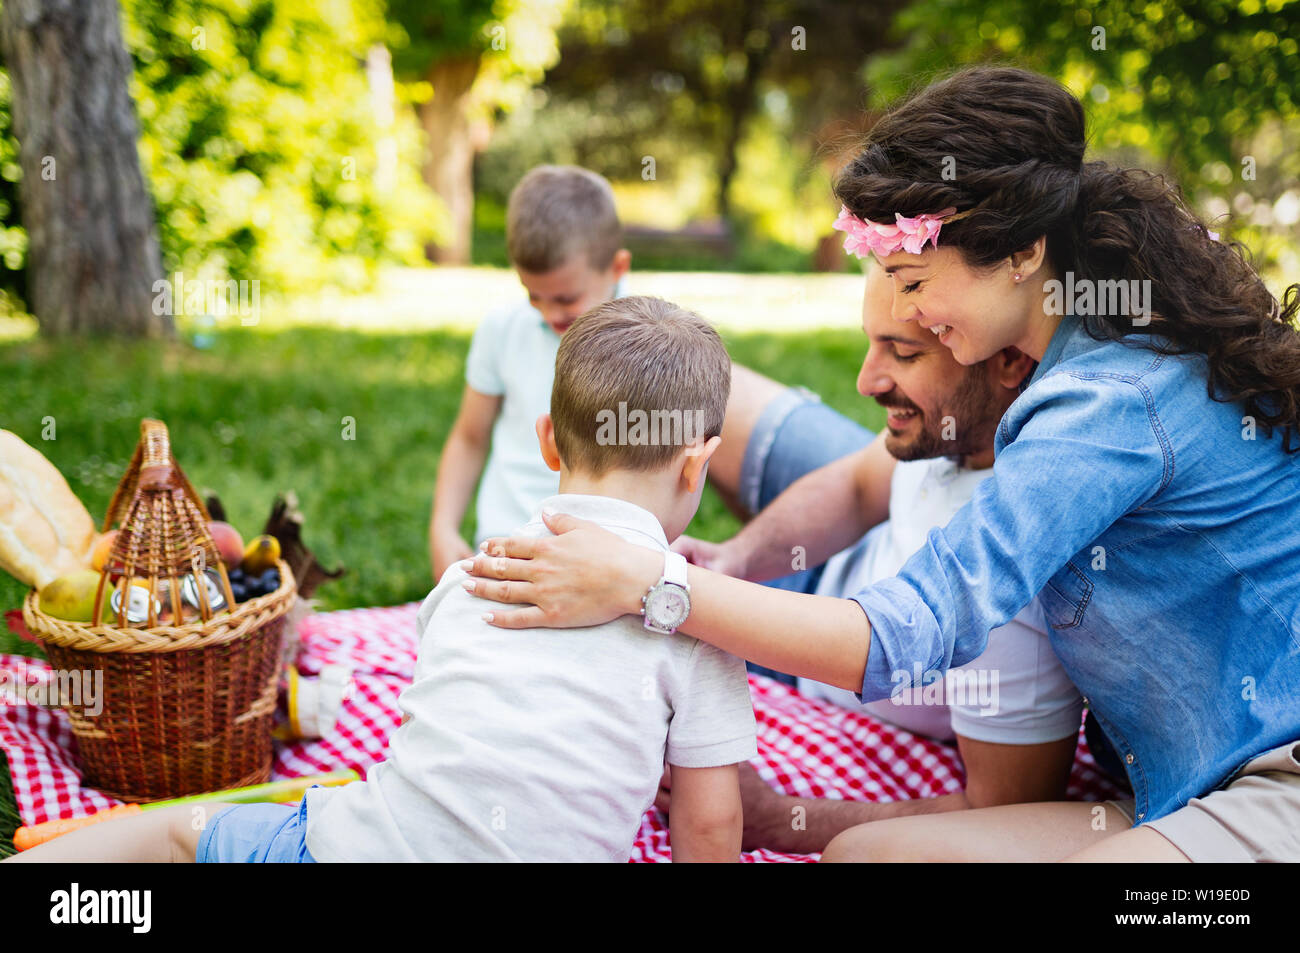 Young family with children having fun in nature Stock Photo